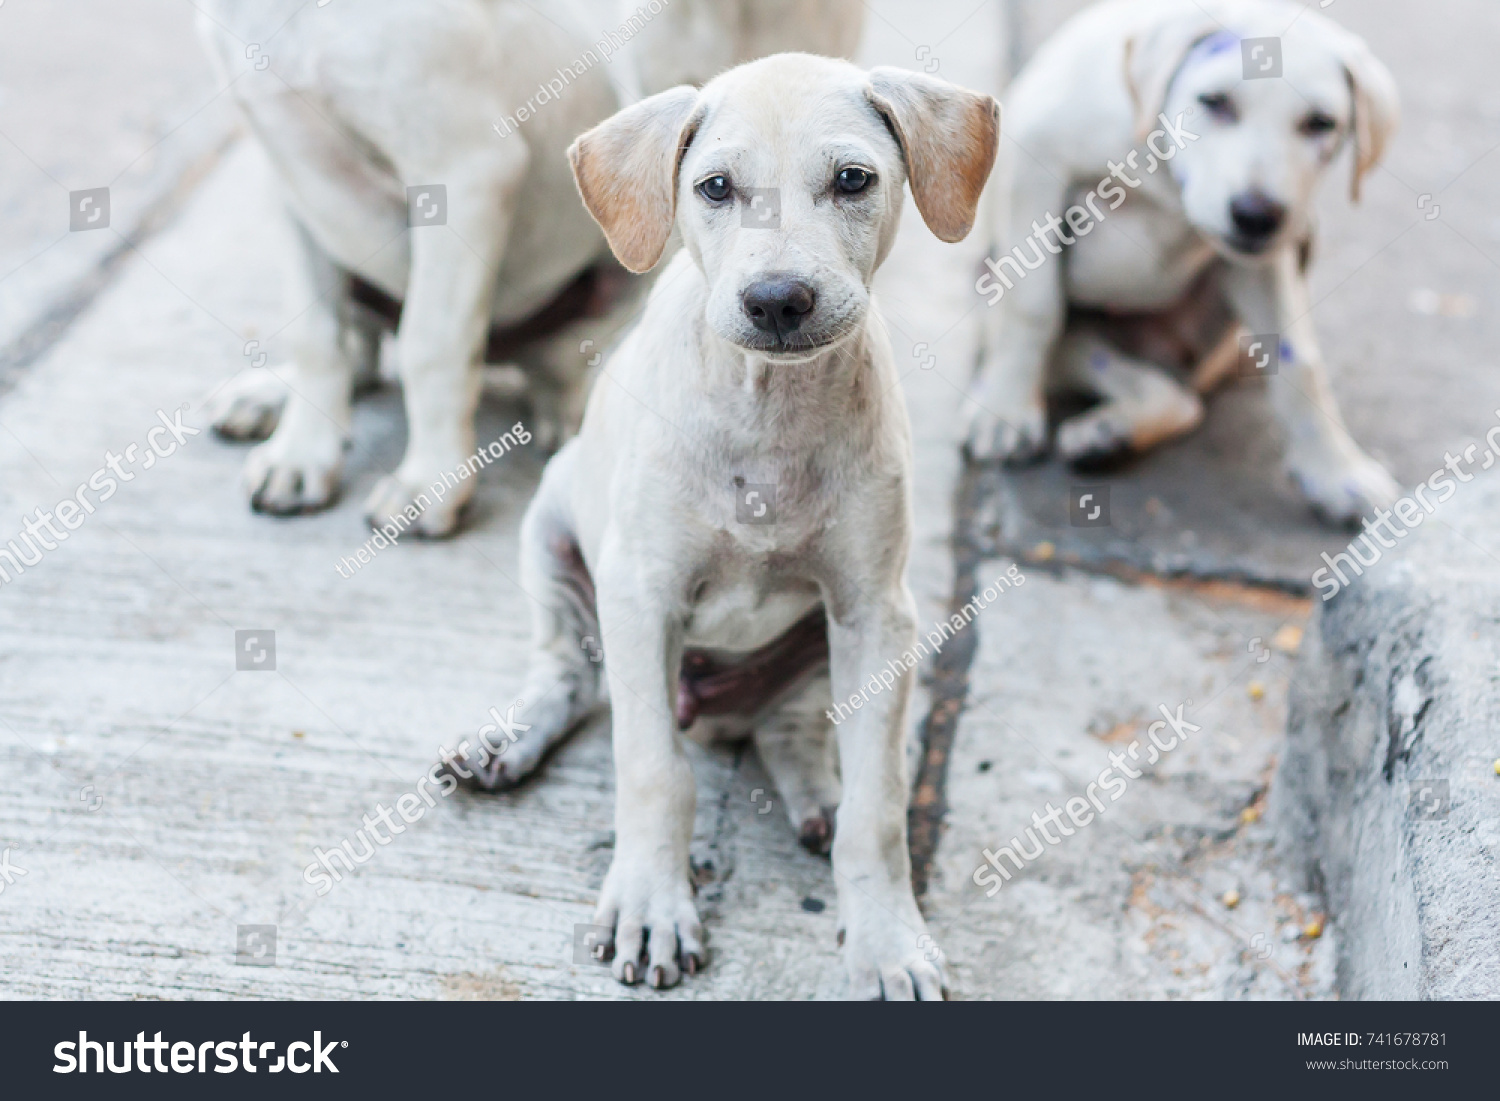 Stray dogs sit on the floor with sad eyes and look at the camera, Selective focus. #741678781